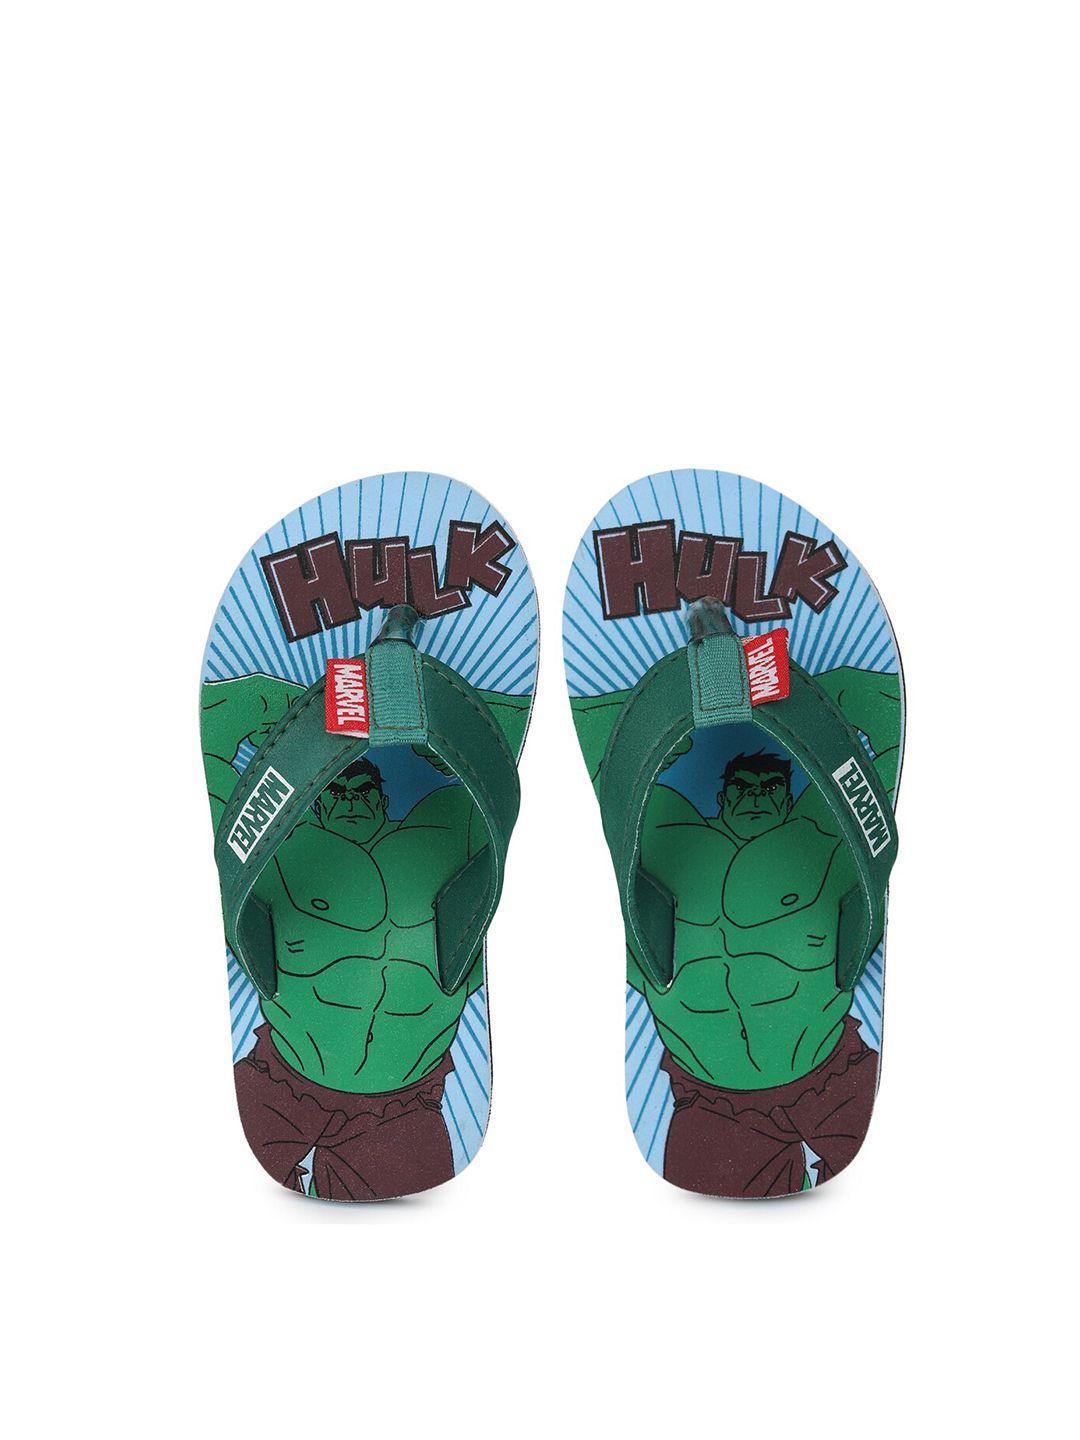 toothless-boys-green-&-blue-printed-rubber-thong-flip-flops